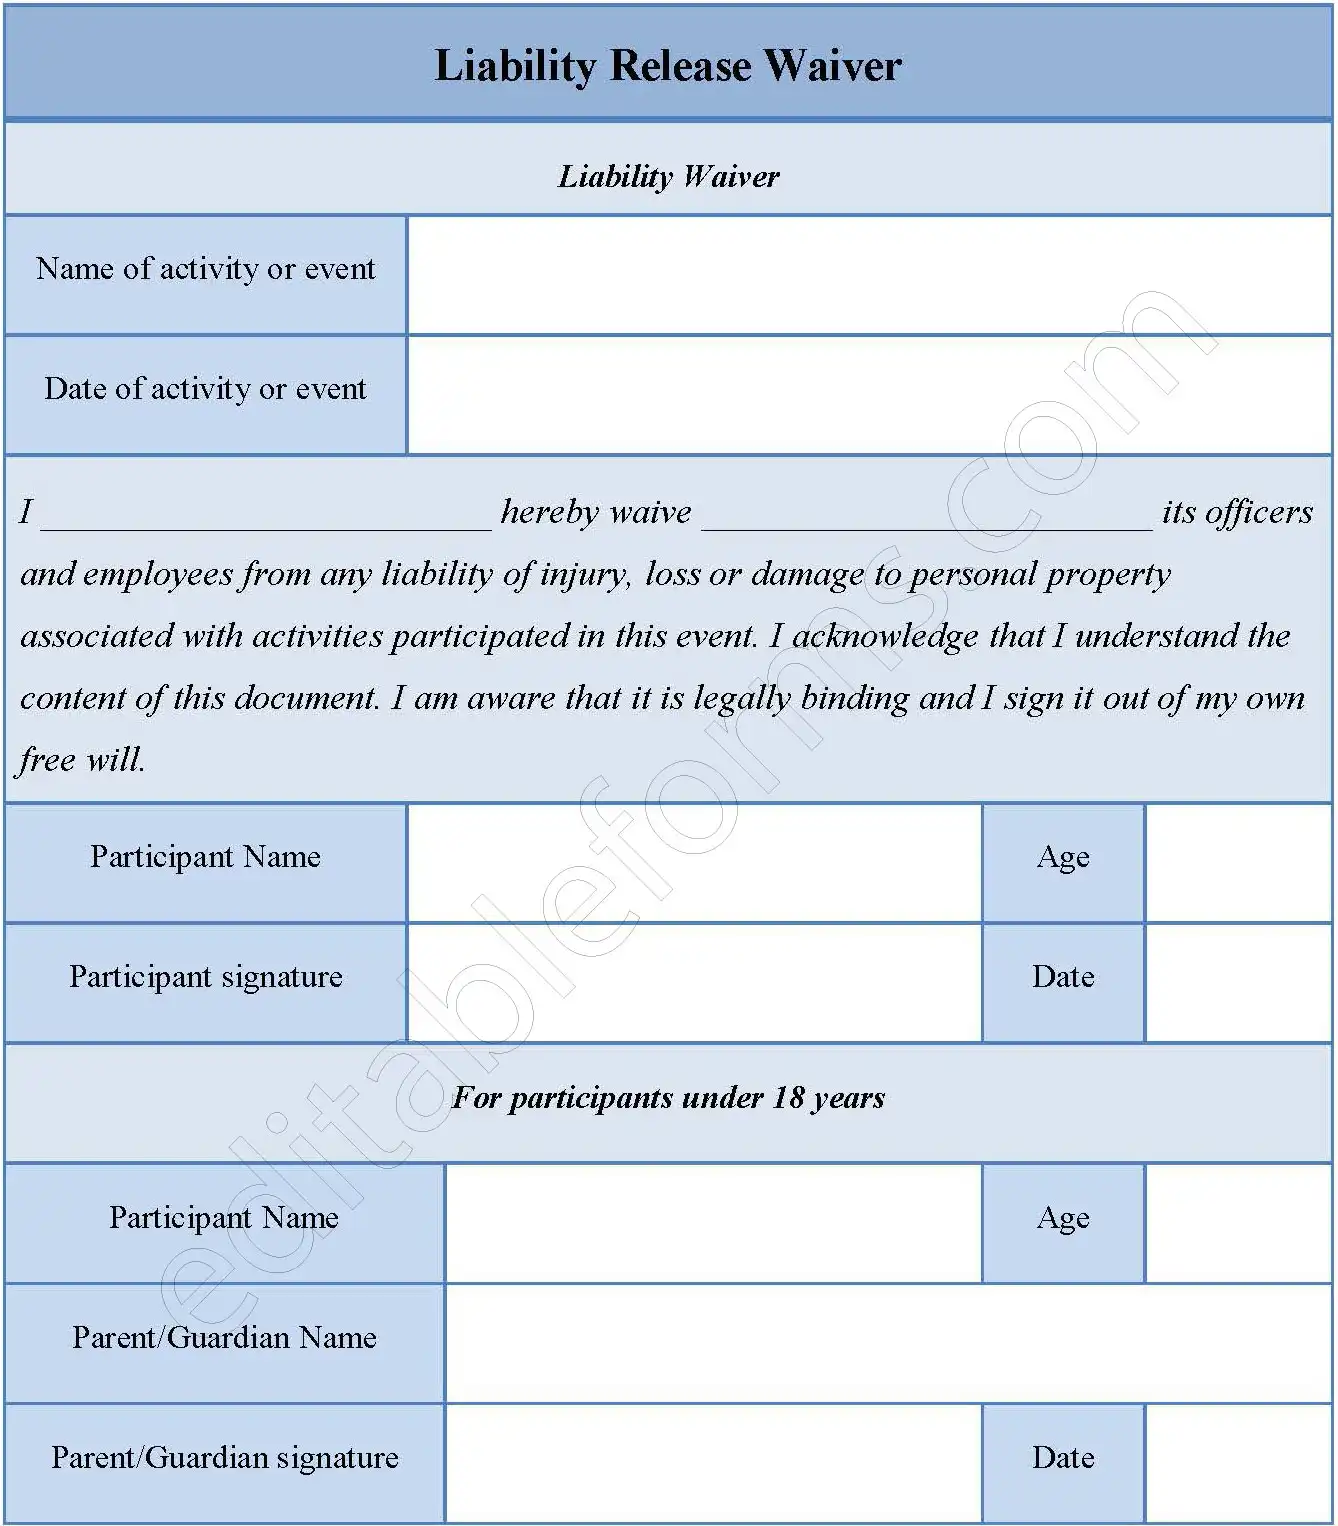 Liability Waiver Fillable PDF Form